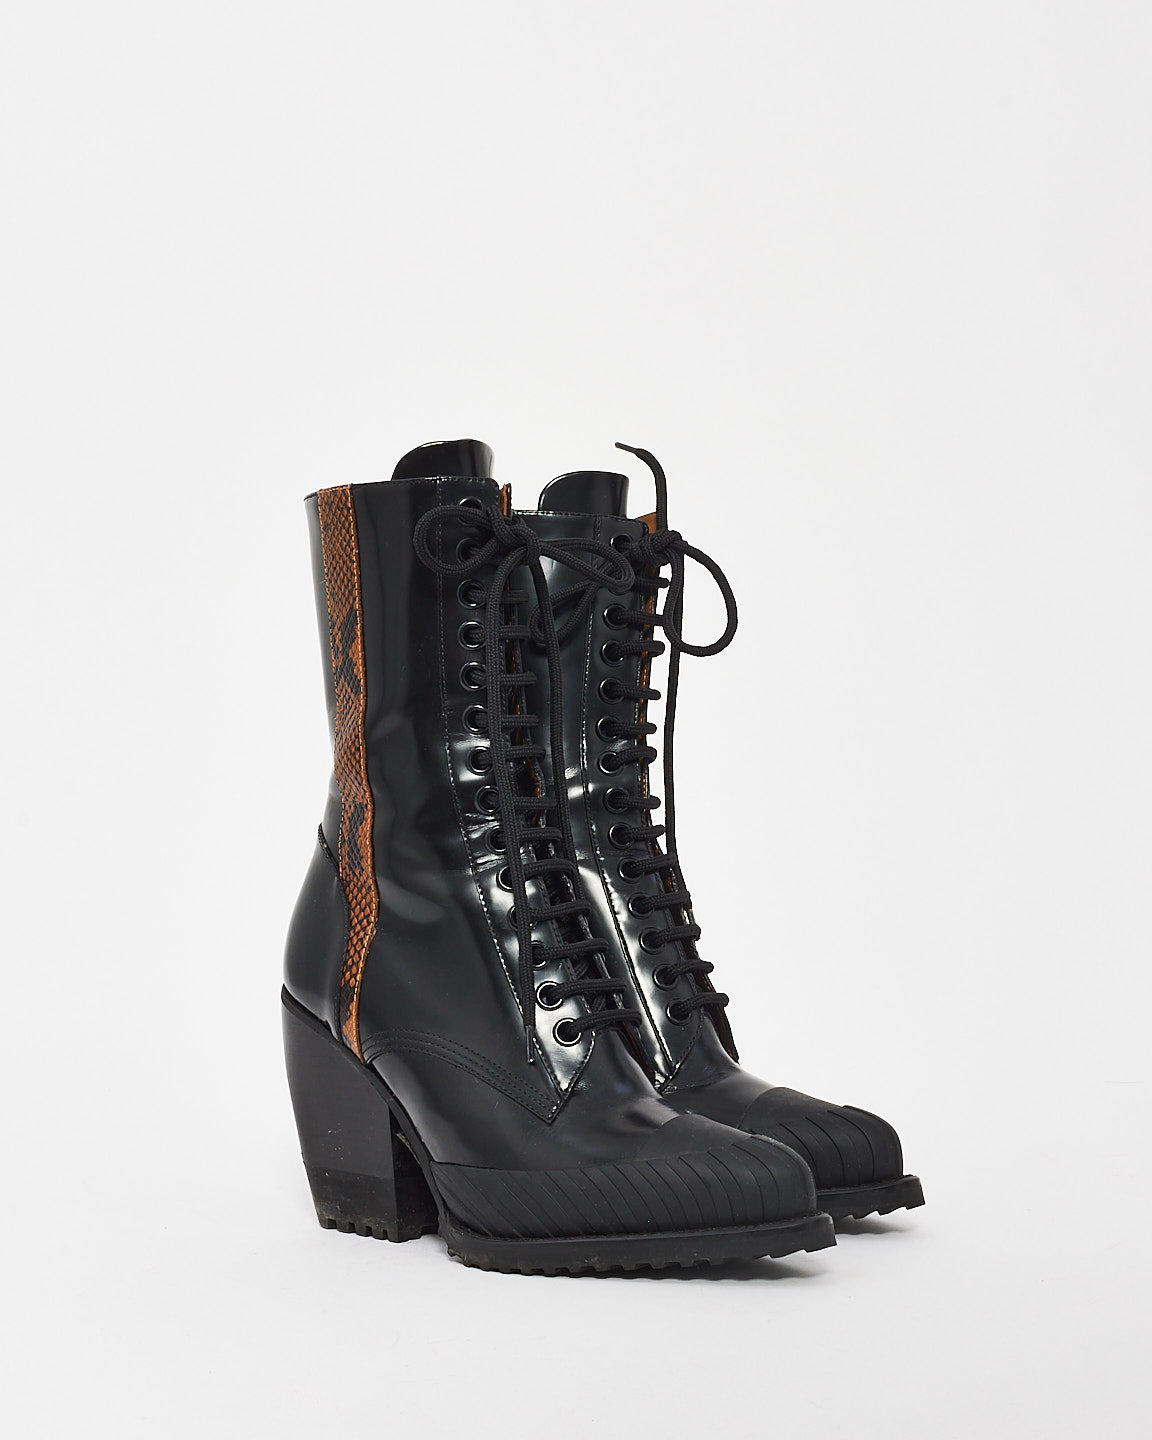 Chloé Black Glossed Leather Ryle Boots -38.5